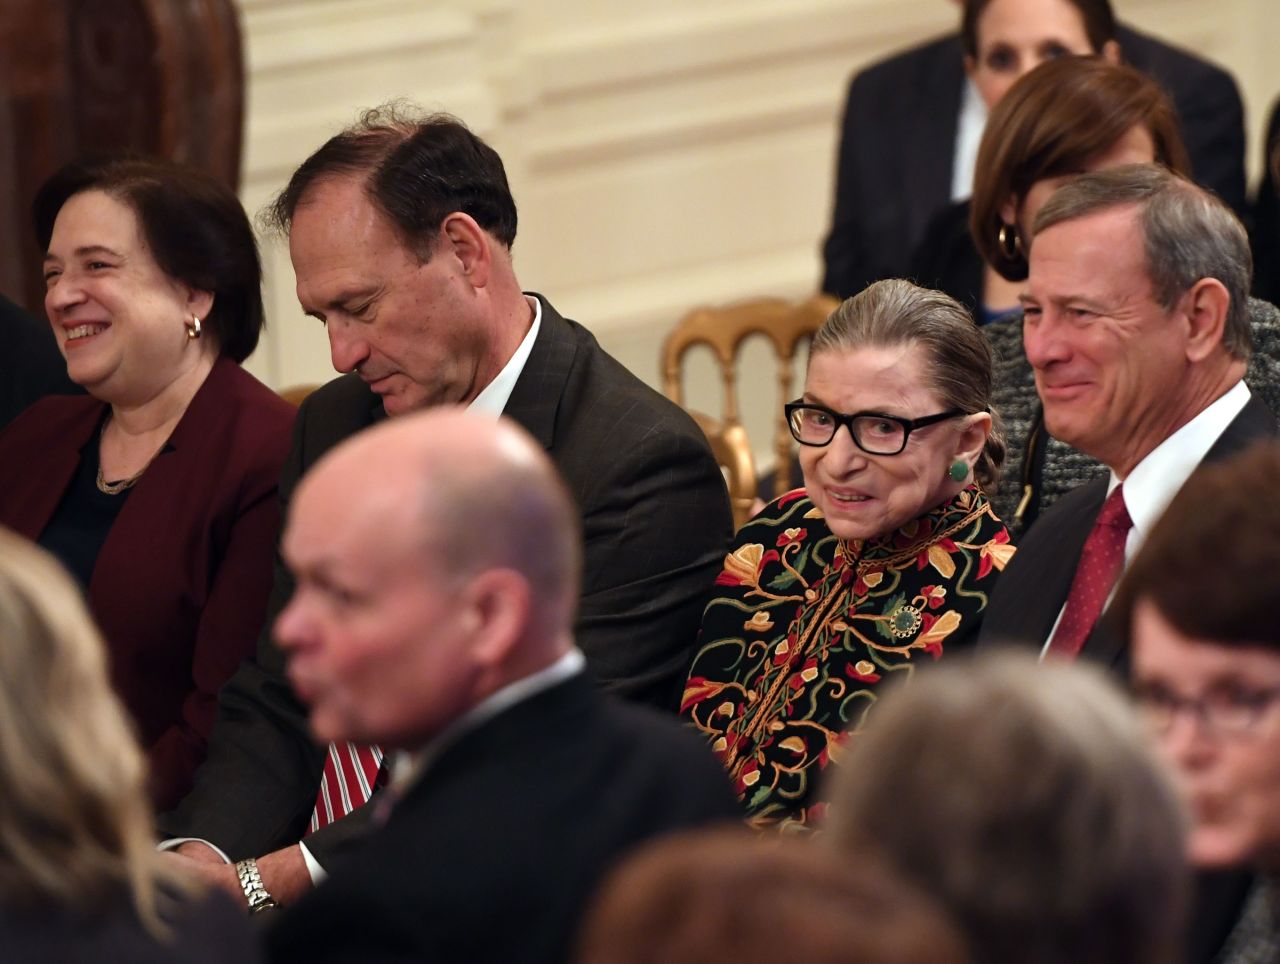 Ginsburg and other Supreme Court justices attend a Presidential Medal of Freedom ceremony at the White House in November 2018.